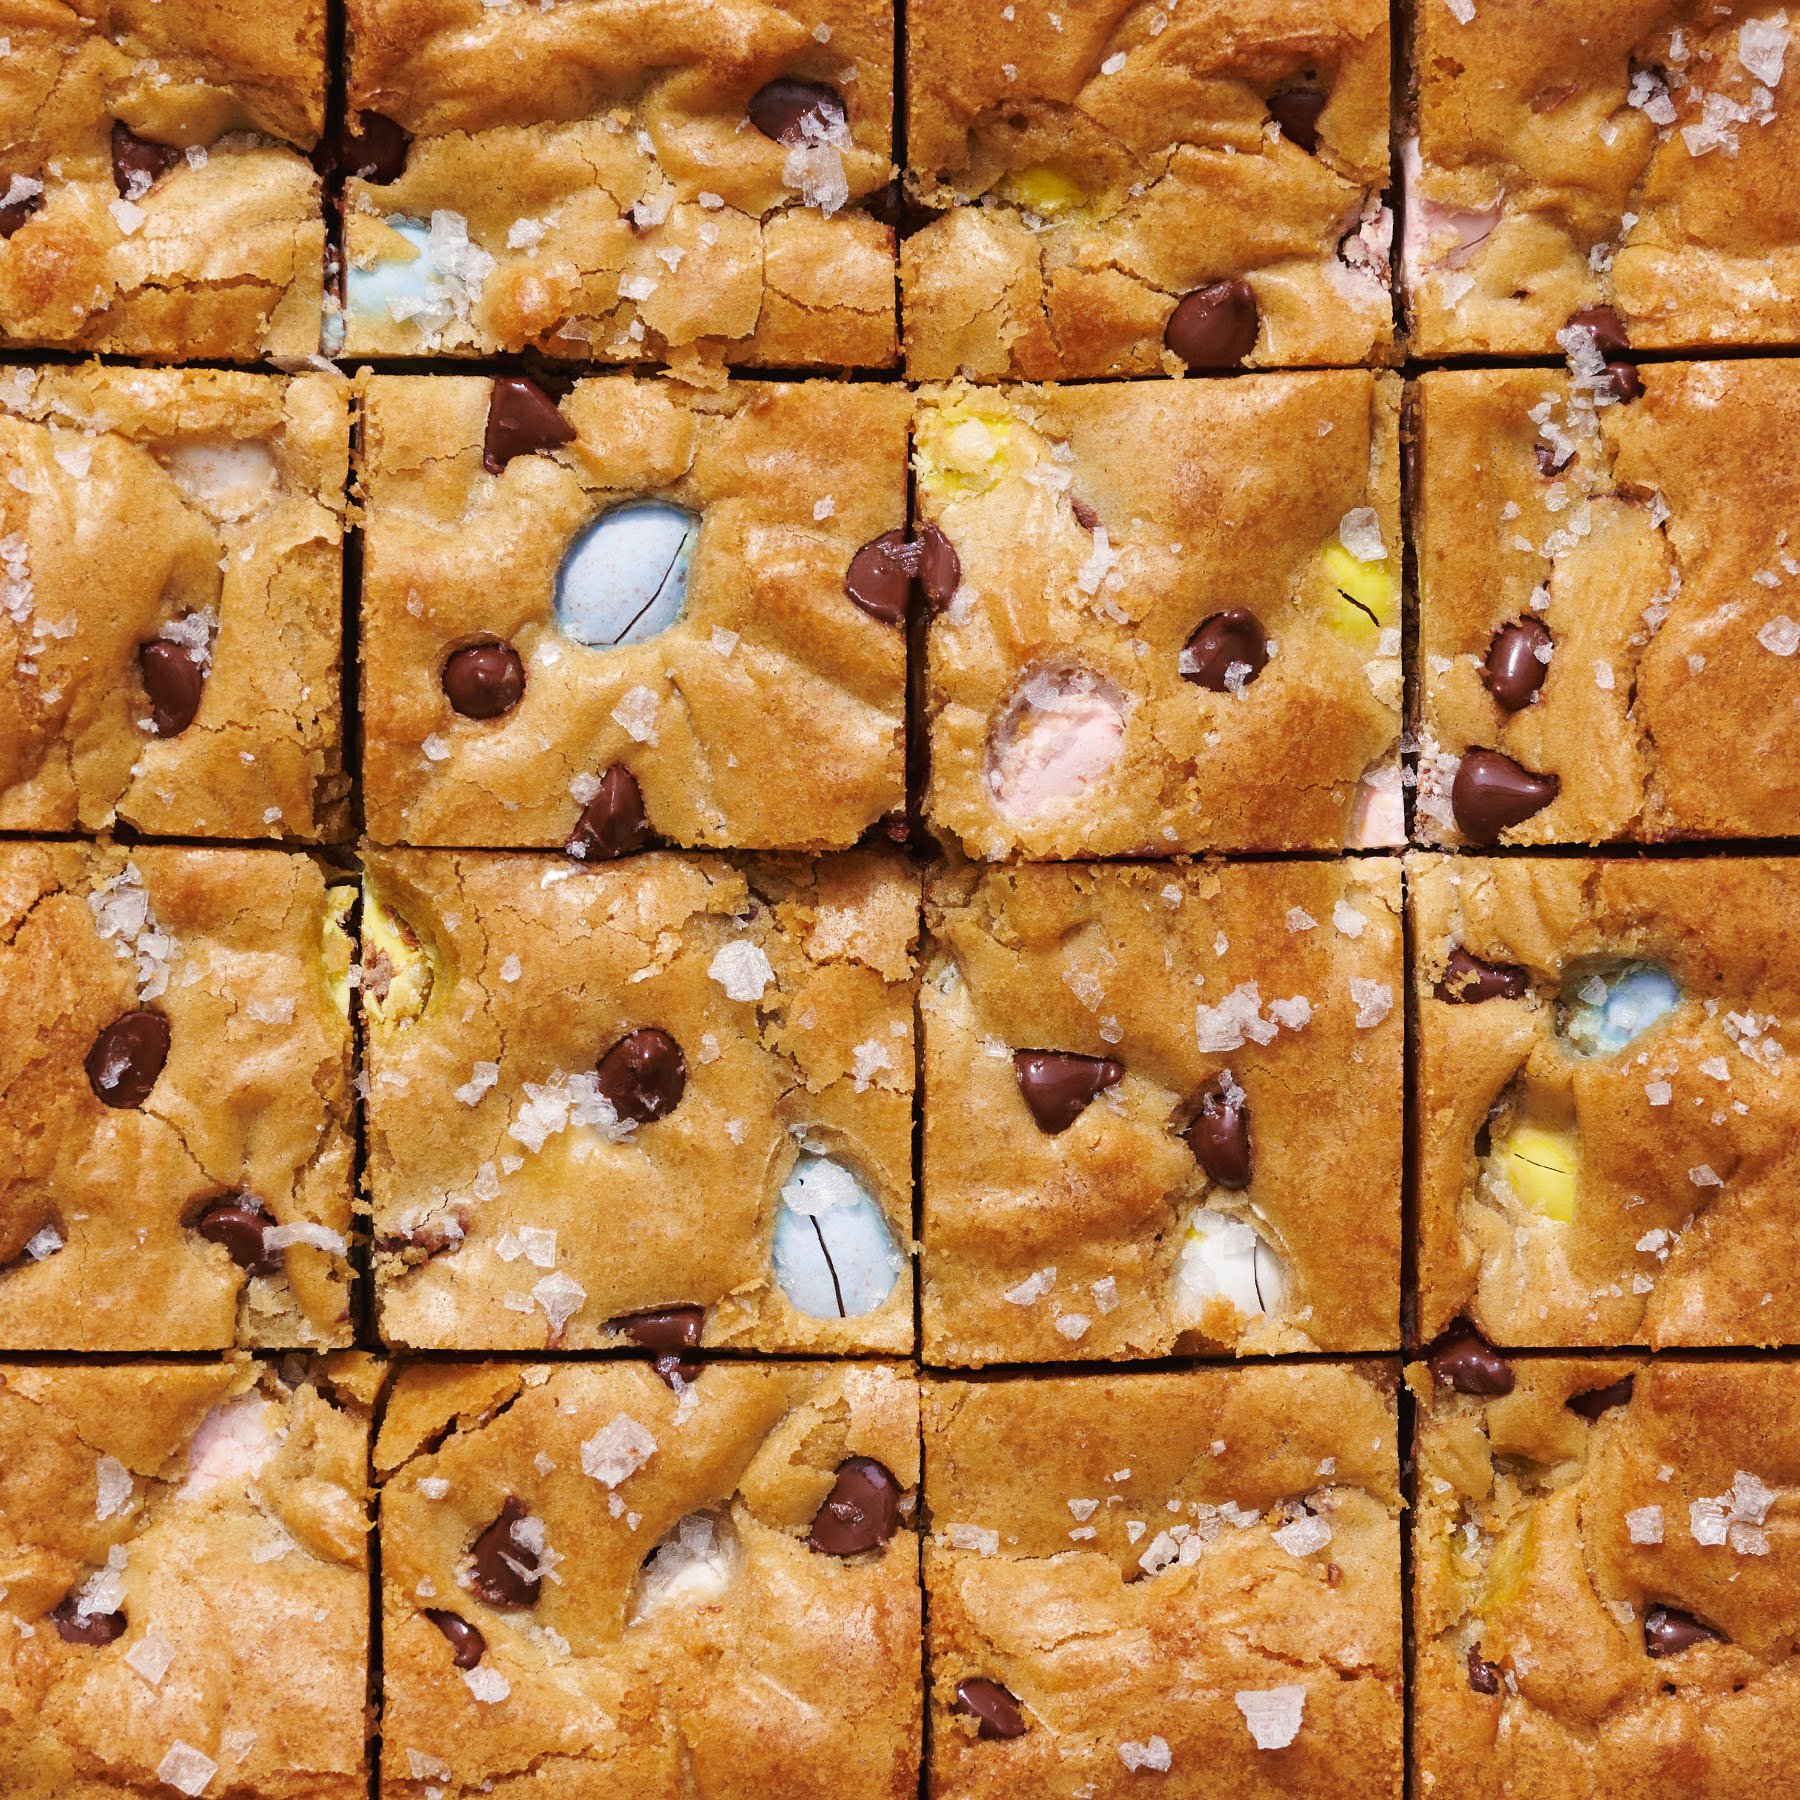 blondies sliced into perfect squares, with lots of pastel mini chocolate eggs visible.